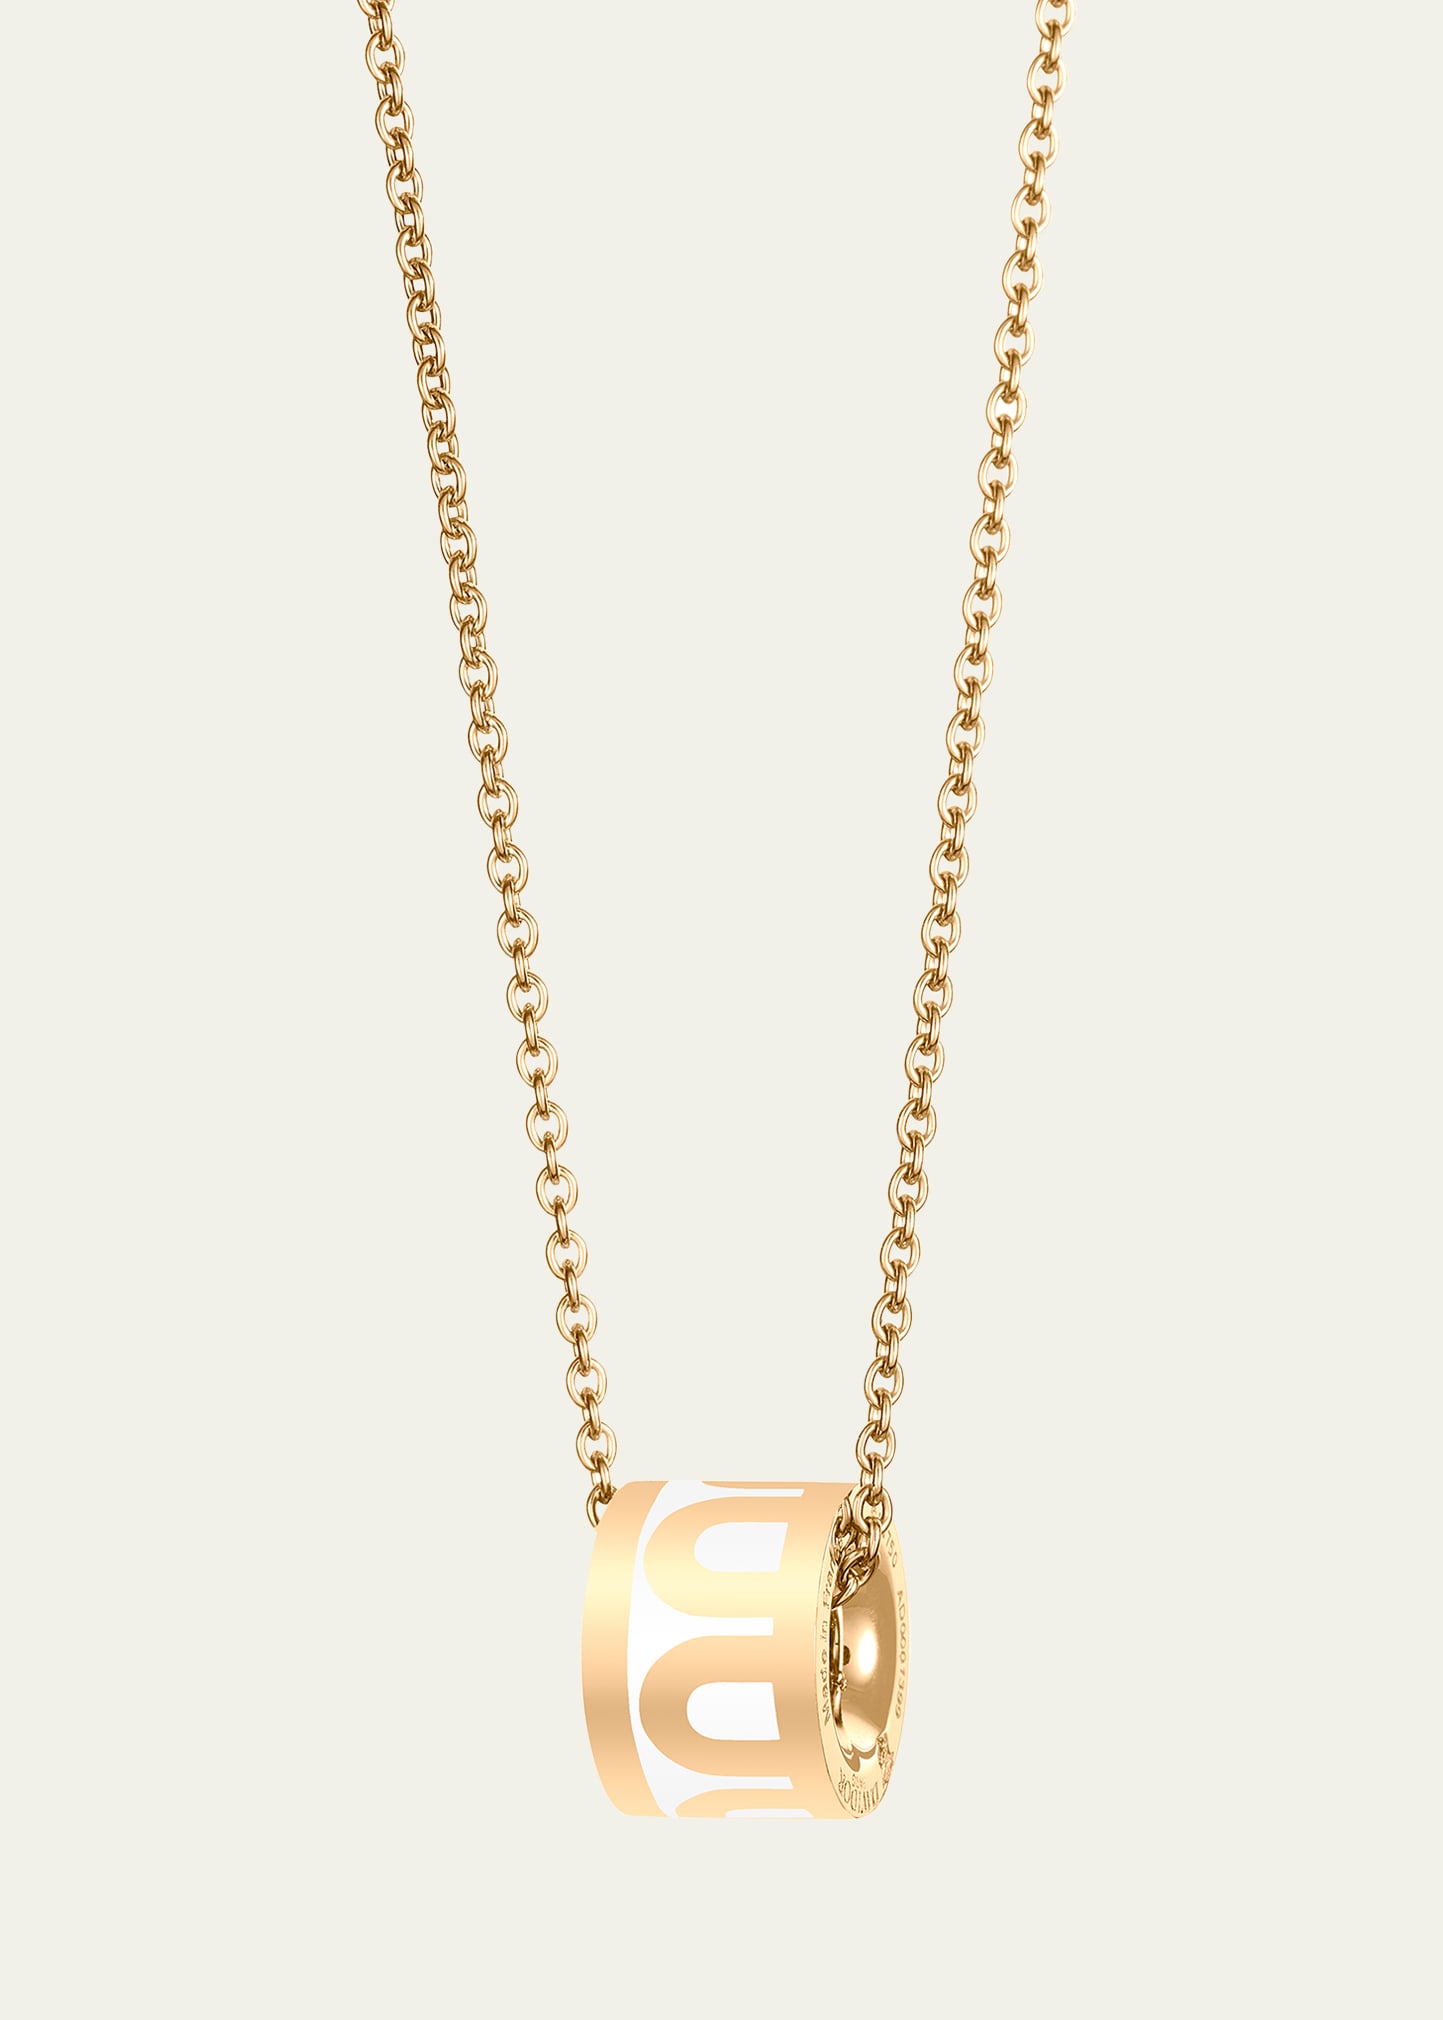 Davidor L'arc De  Bead Necklace In 18k Yellow Gold With Neige Lacquered Ceramic